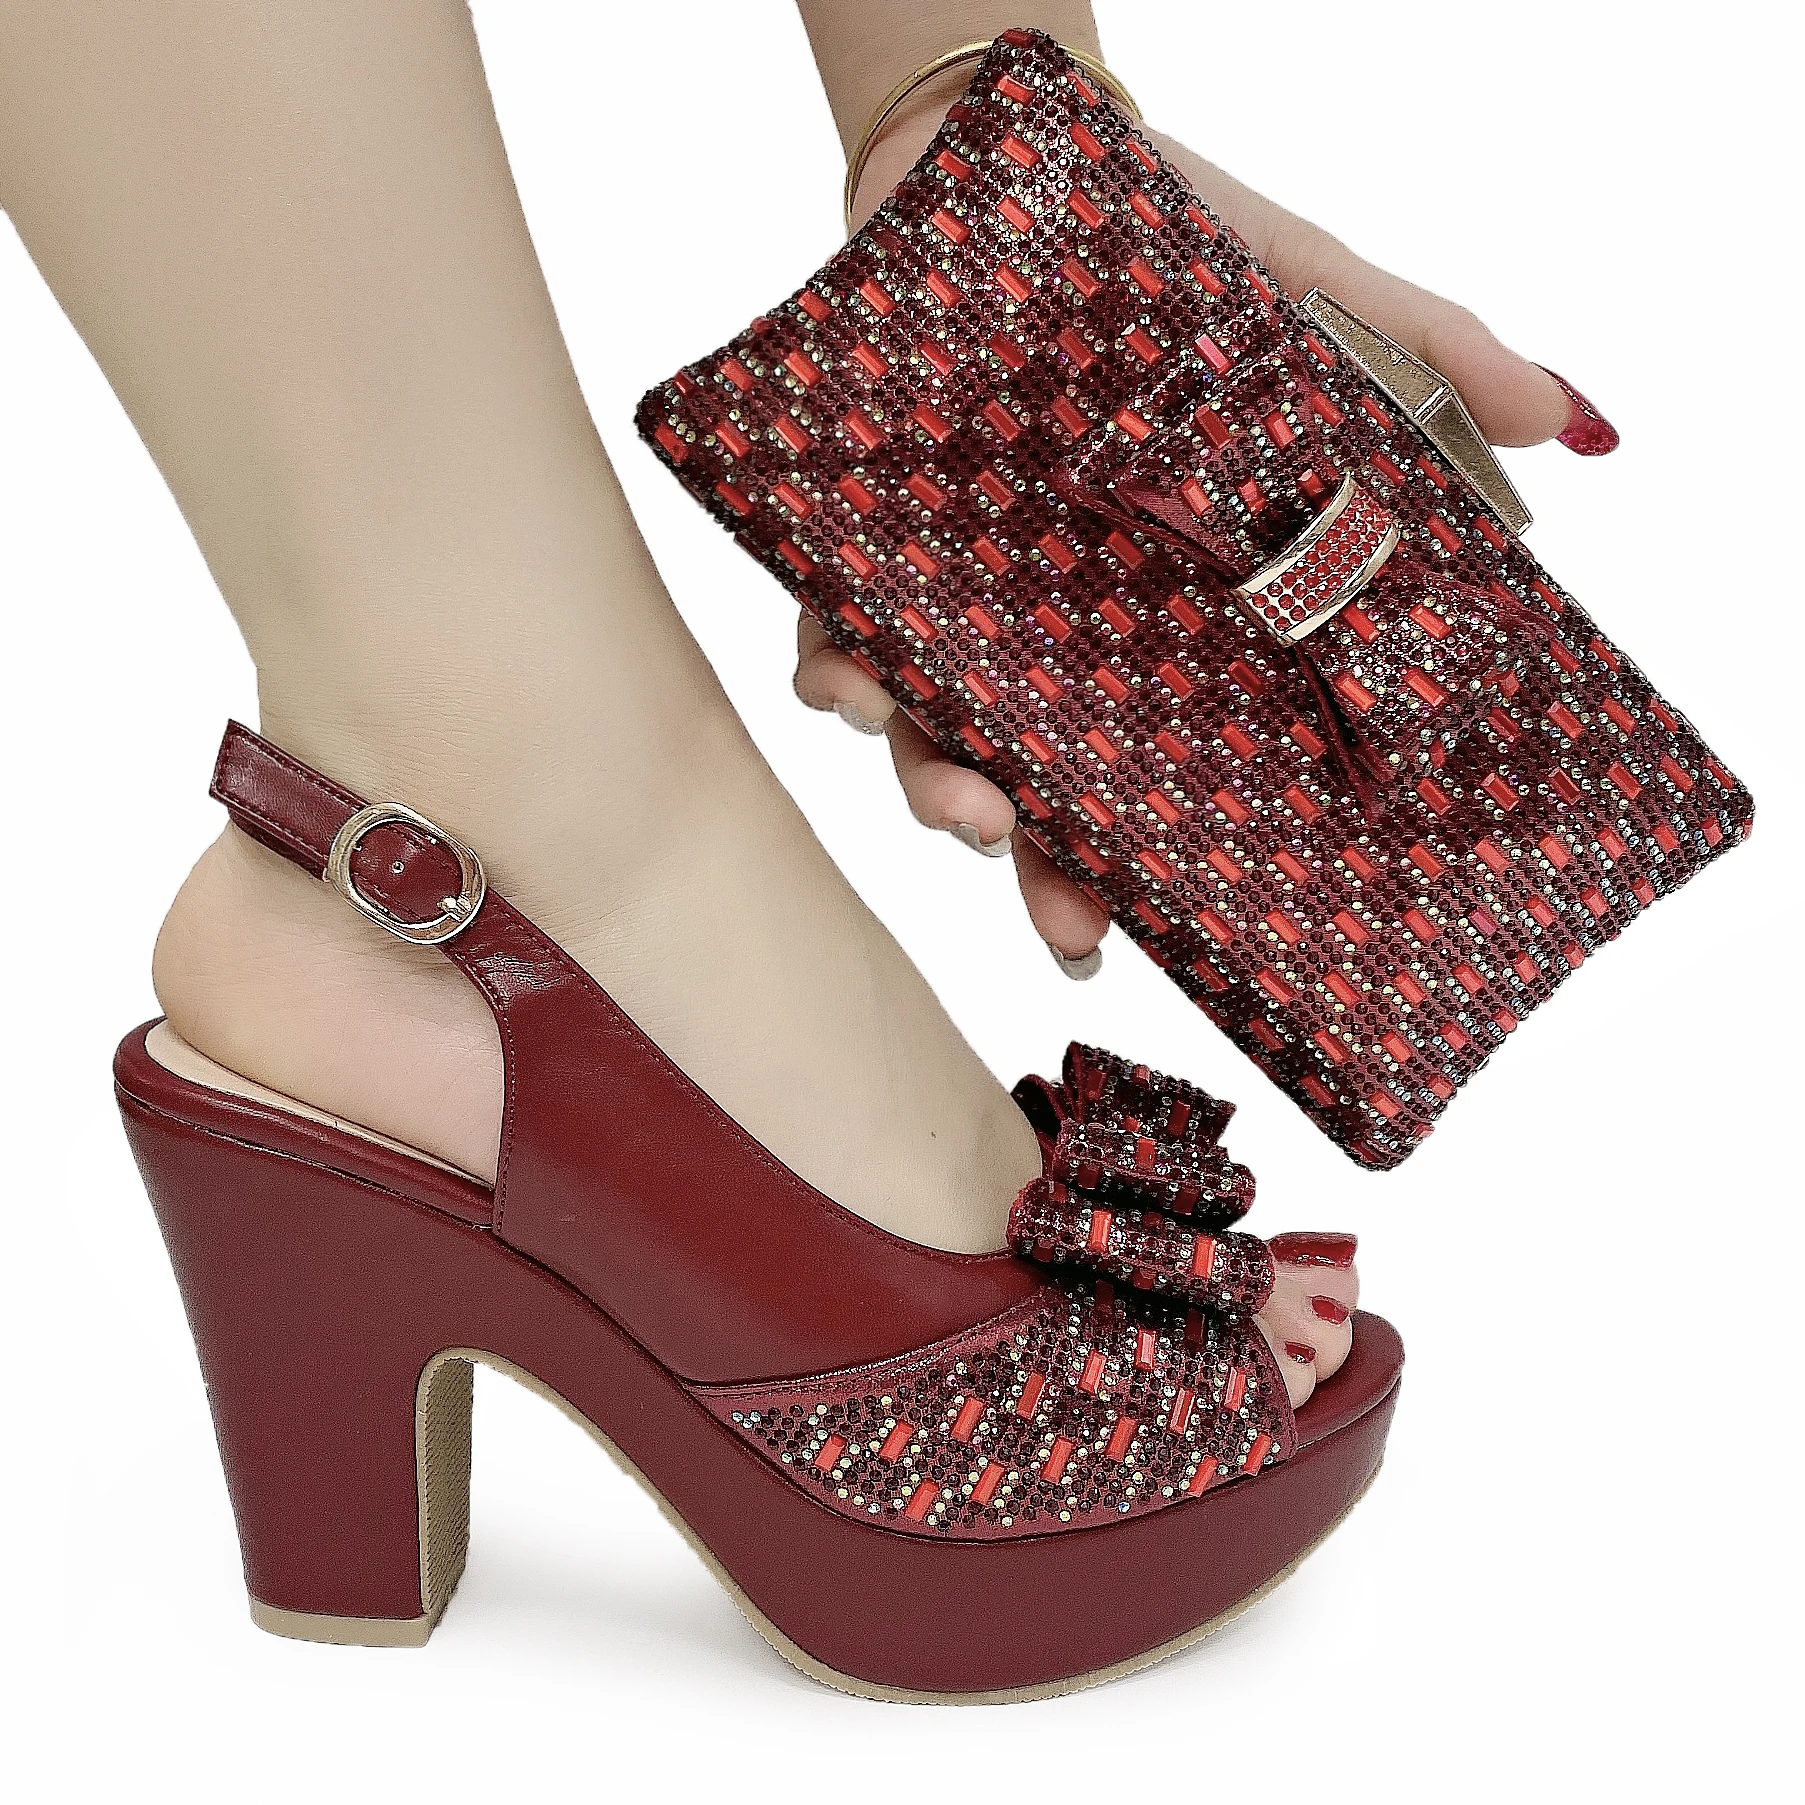 Plus Size 41 42 African Women Shoes with Matching Purse Party Wedding Sexy High Heels and Bag Set Matching Purse and Shoes Set